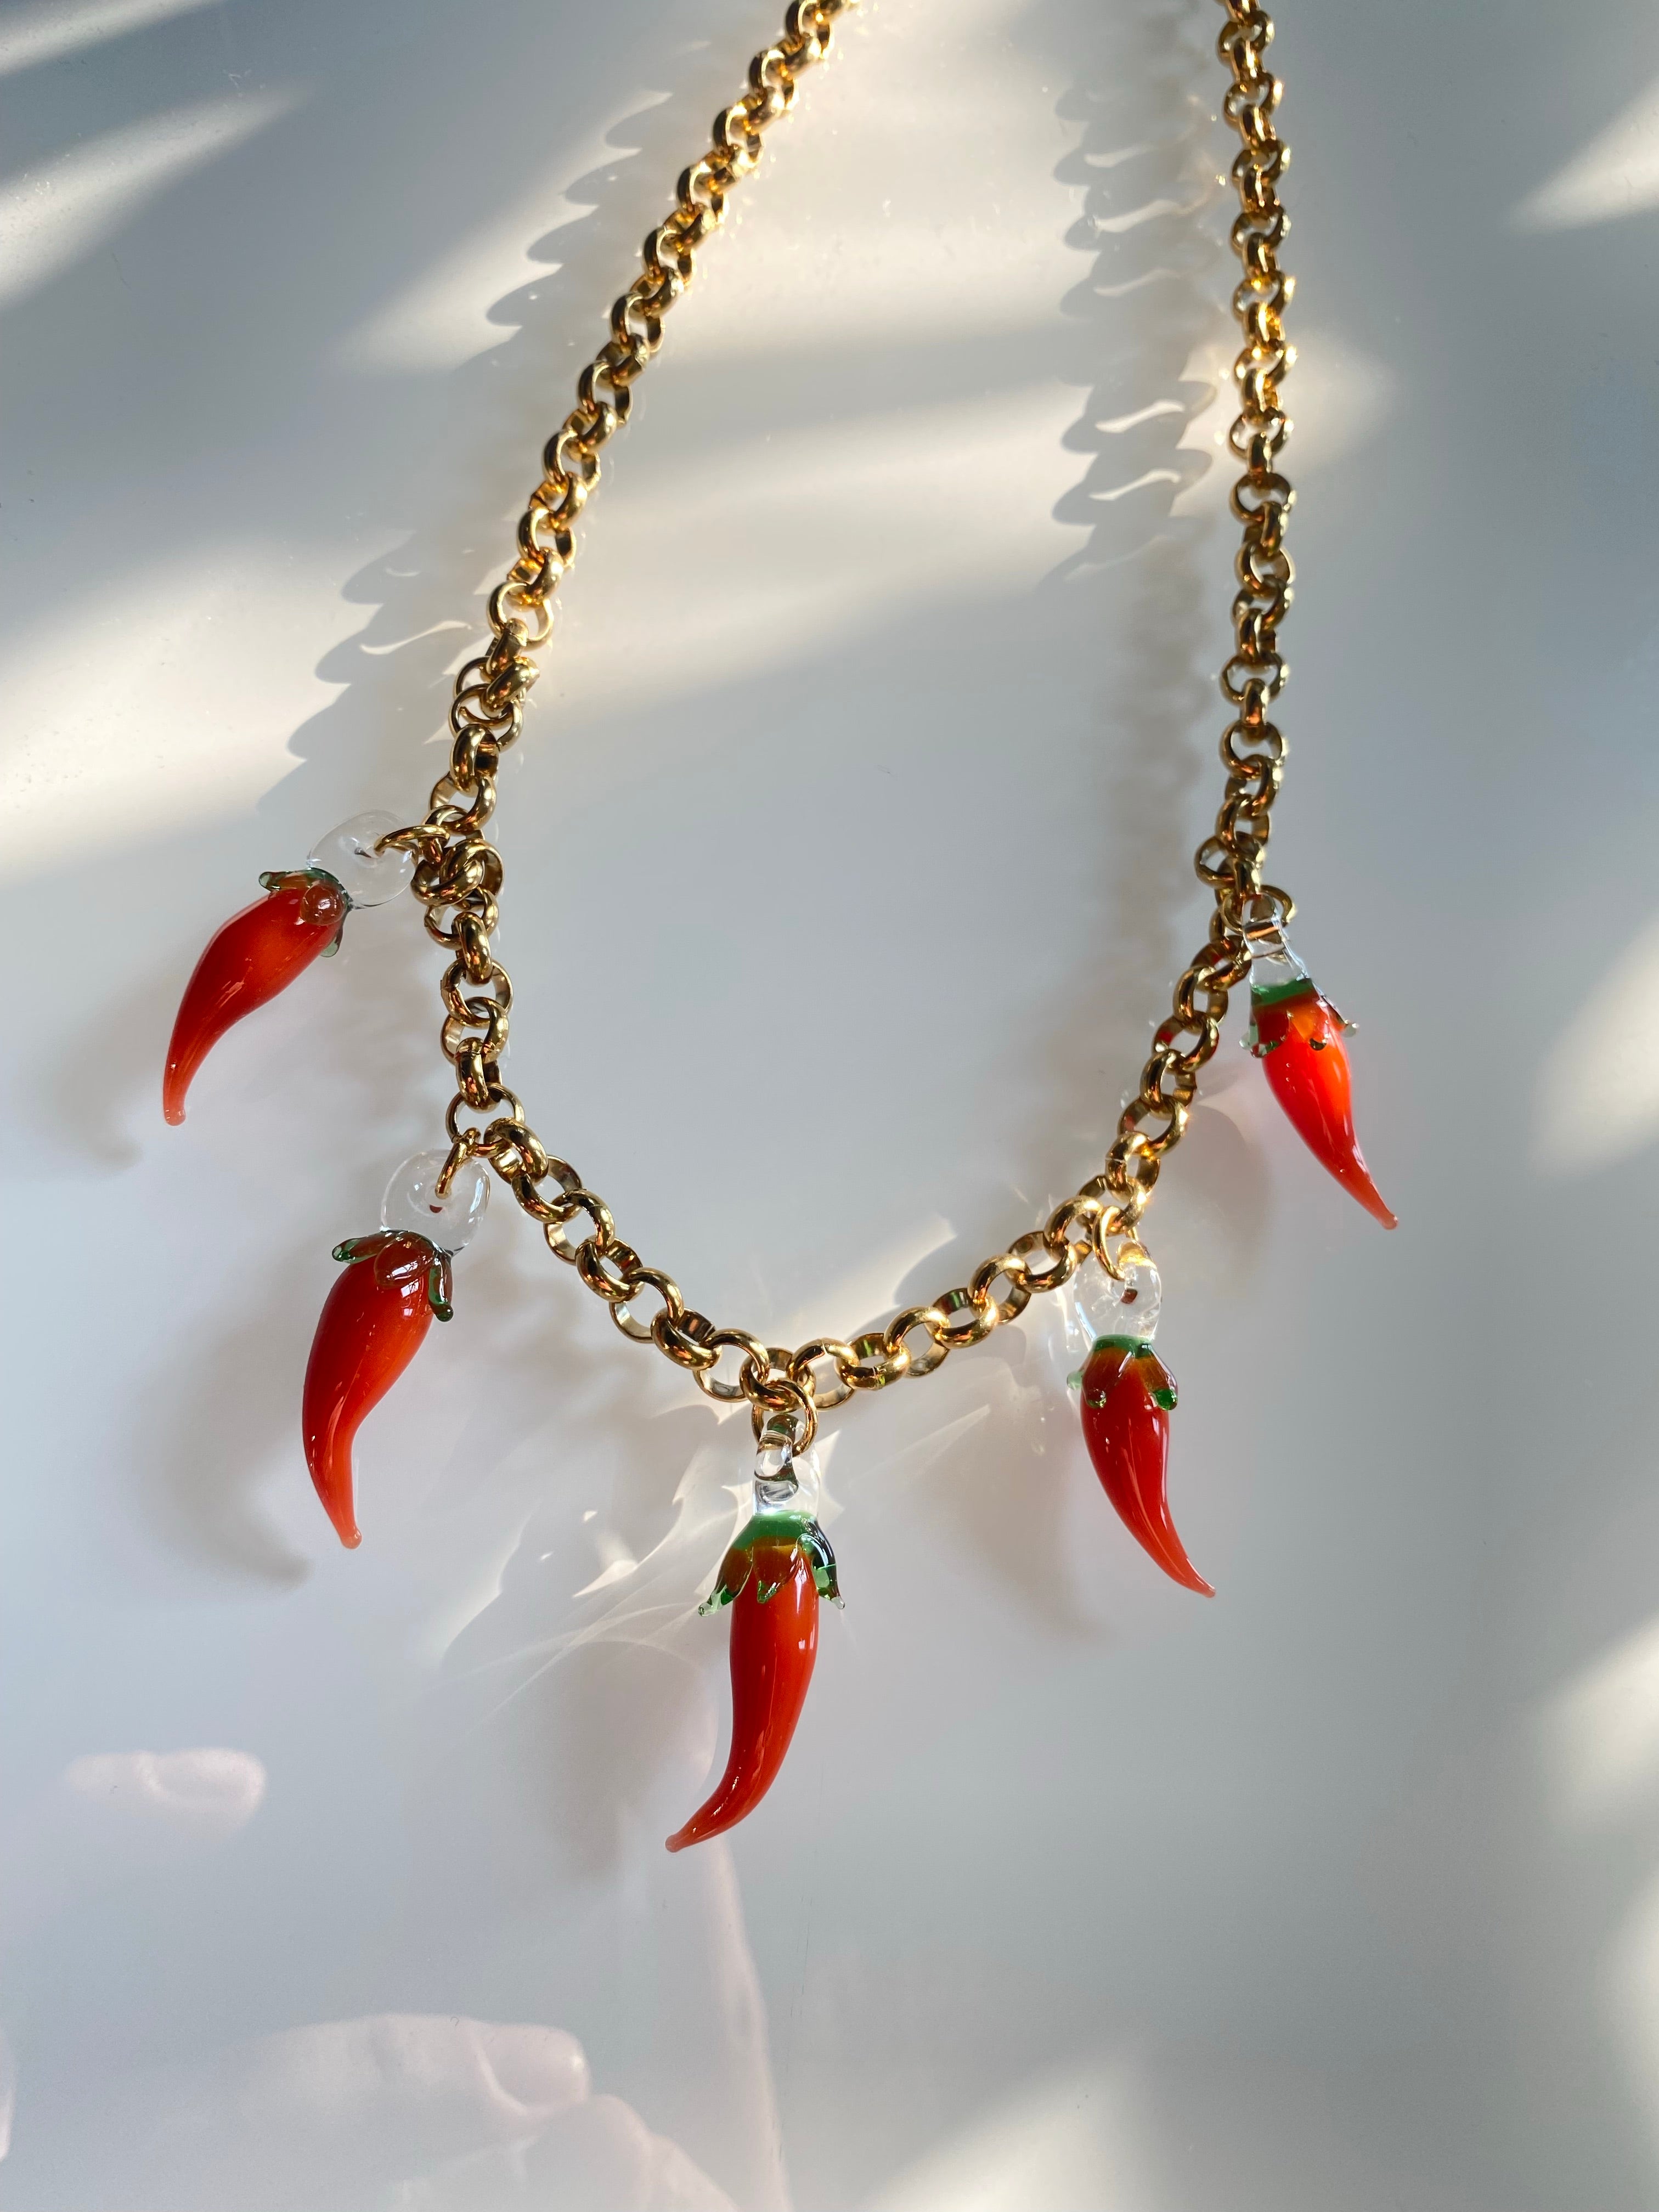 Red Green Yellow Chilli Pepper Necklace Metal Cayenne Pepper Paprika  Vegetables fruit Pendant Necklaces Charm For women jewelry